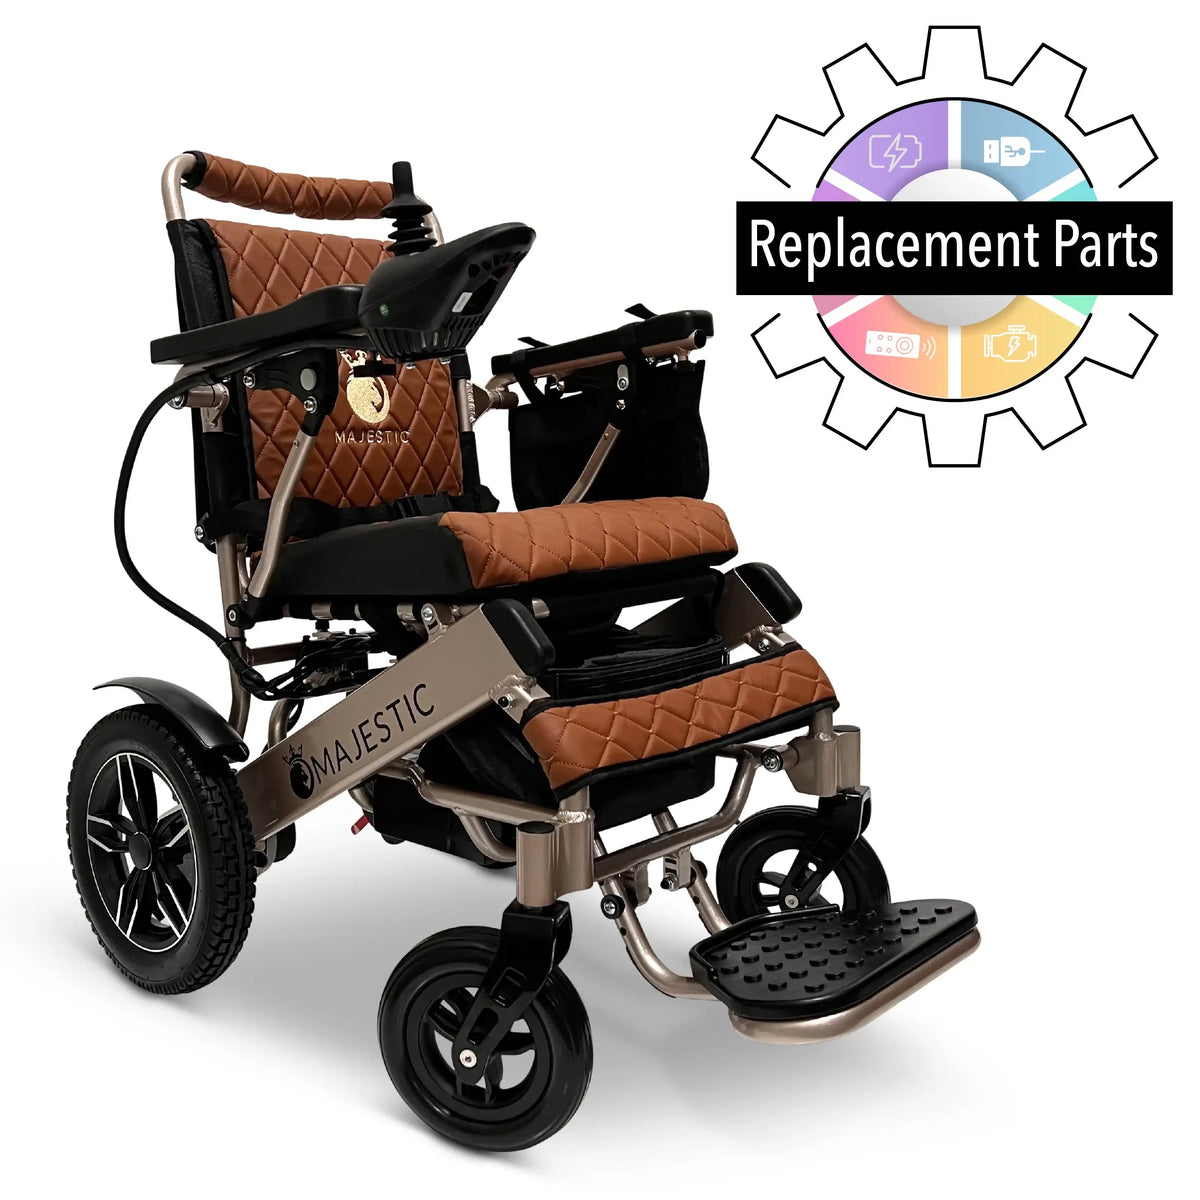 IQ-8000 Electric Wheelchair Replacement Parts